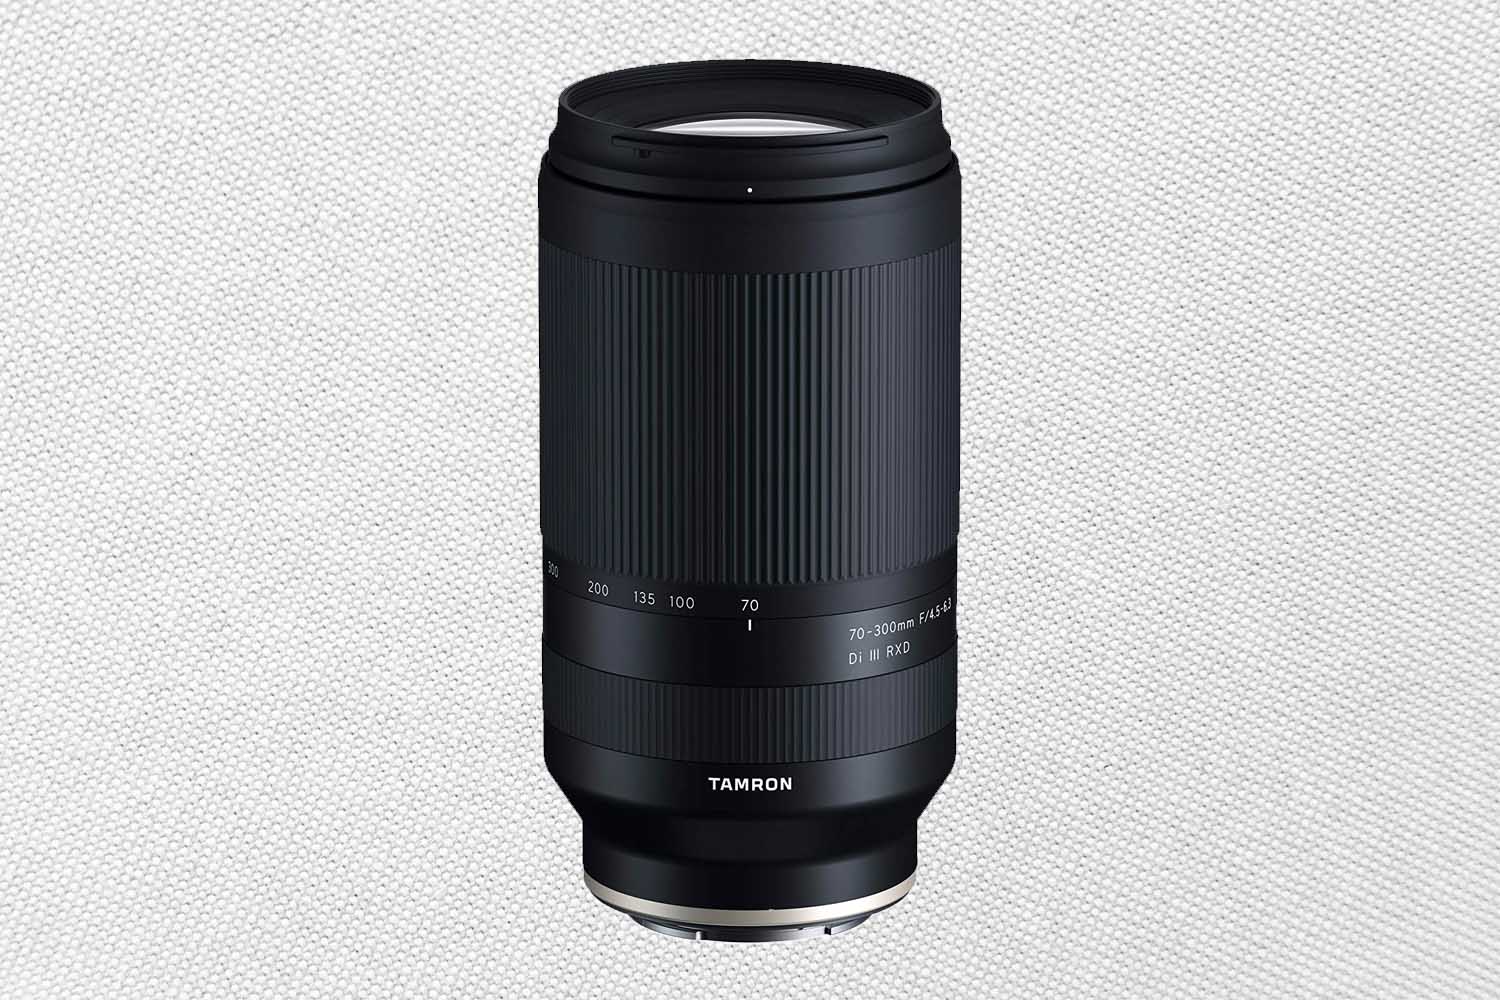 Tamron 70-300mm F/4.5-6.3 Di III RXD for Sony Mirrorless Full Frame